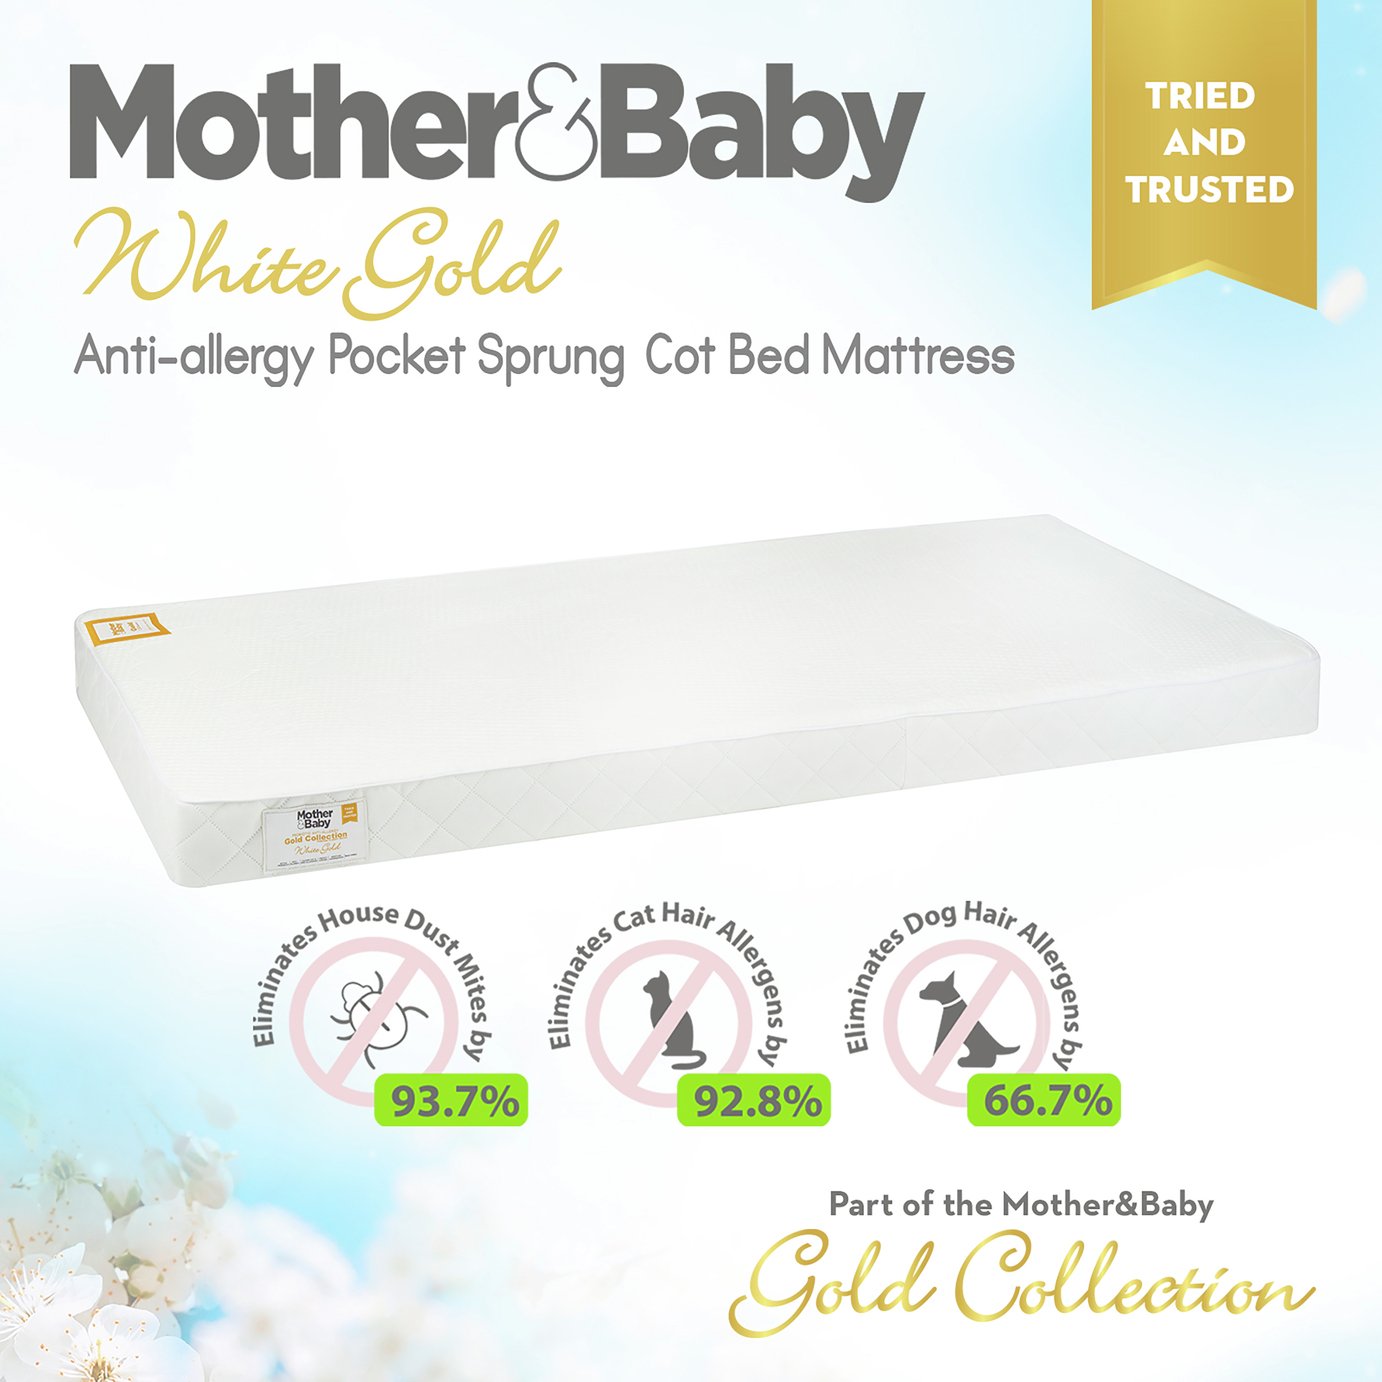 Mother&Baby 140 x 70cm Anti-Allergy Pocket Cot Bed Mattress Review